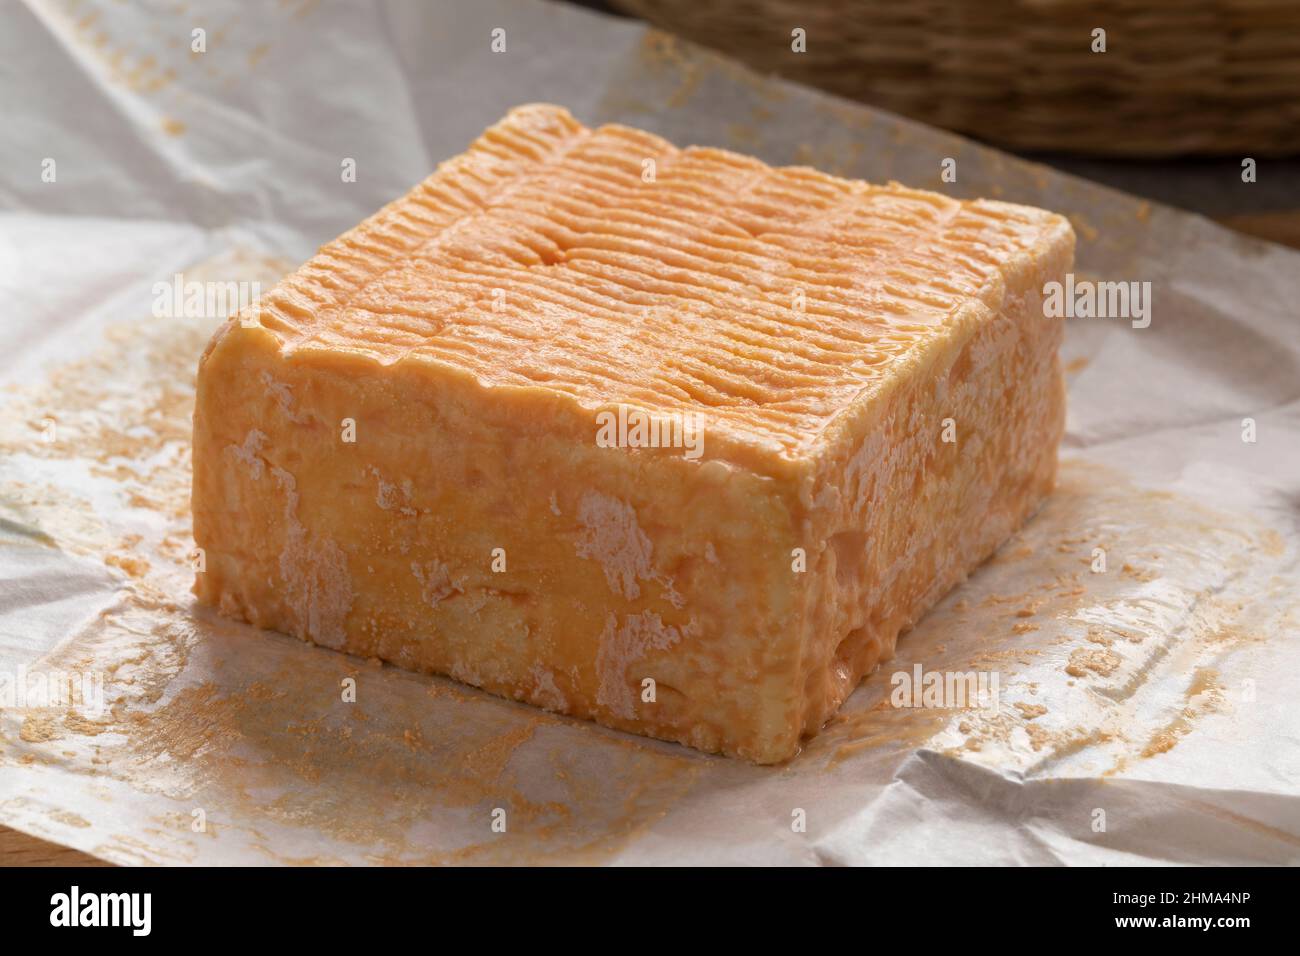 Single whole piece of Limburger or Herve cheese with a strong smell  on package paper Stock Photo